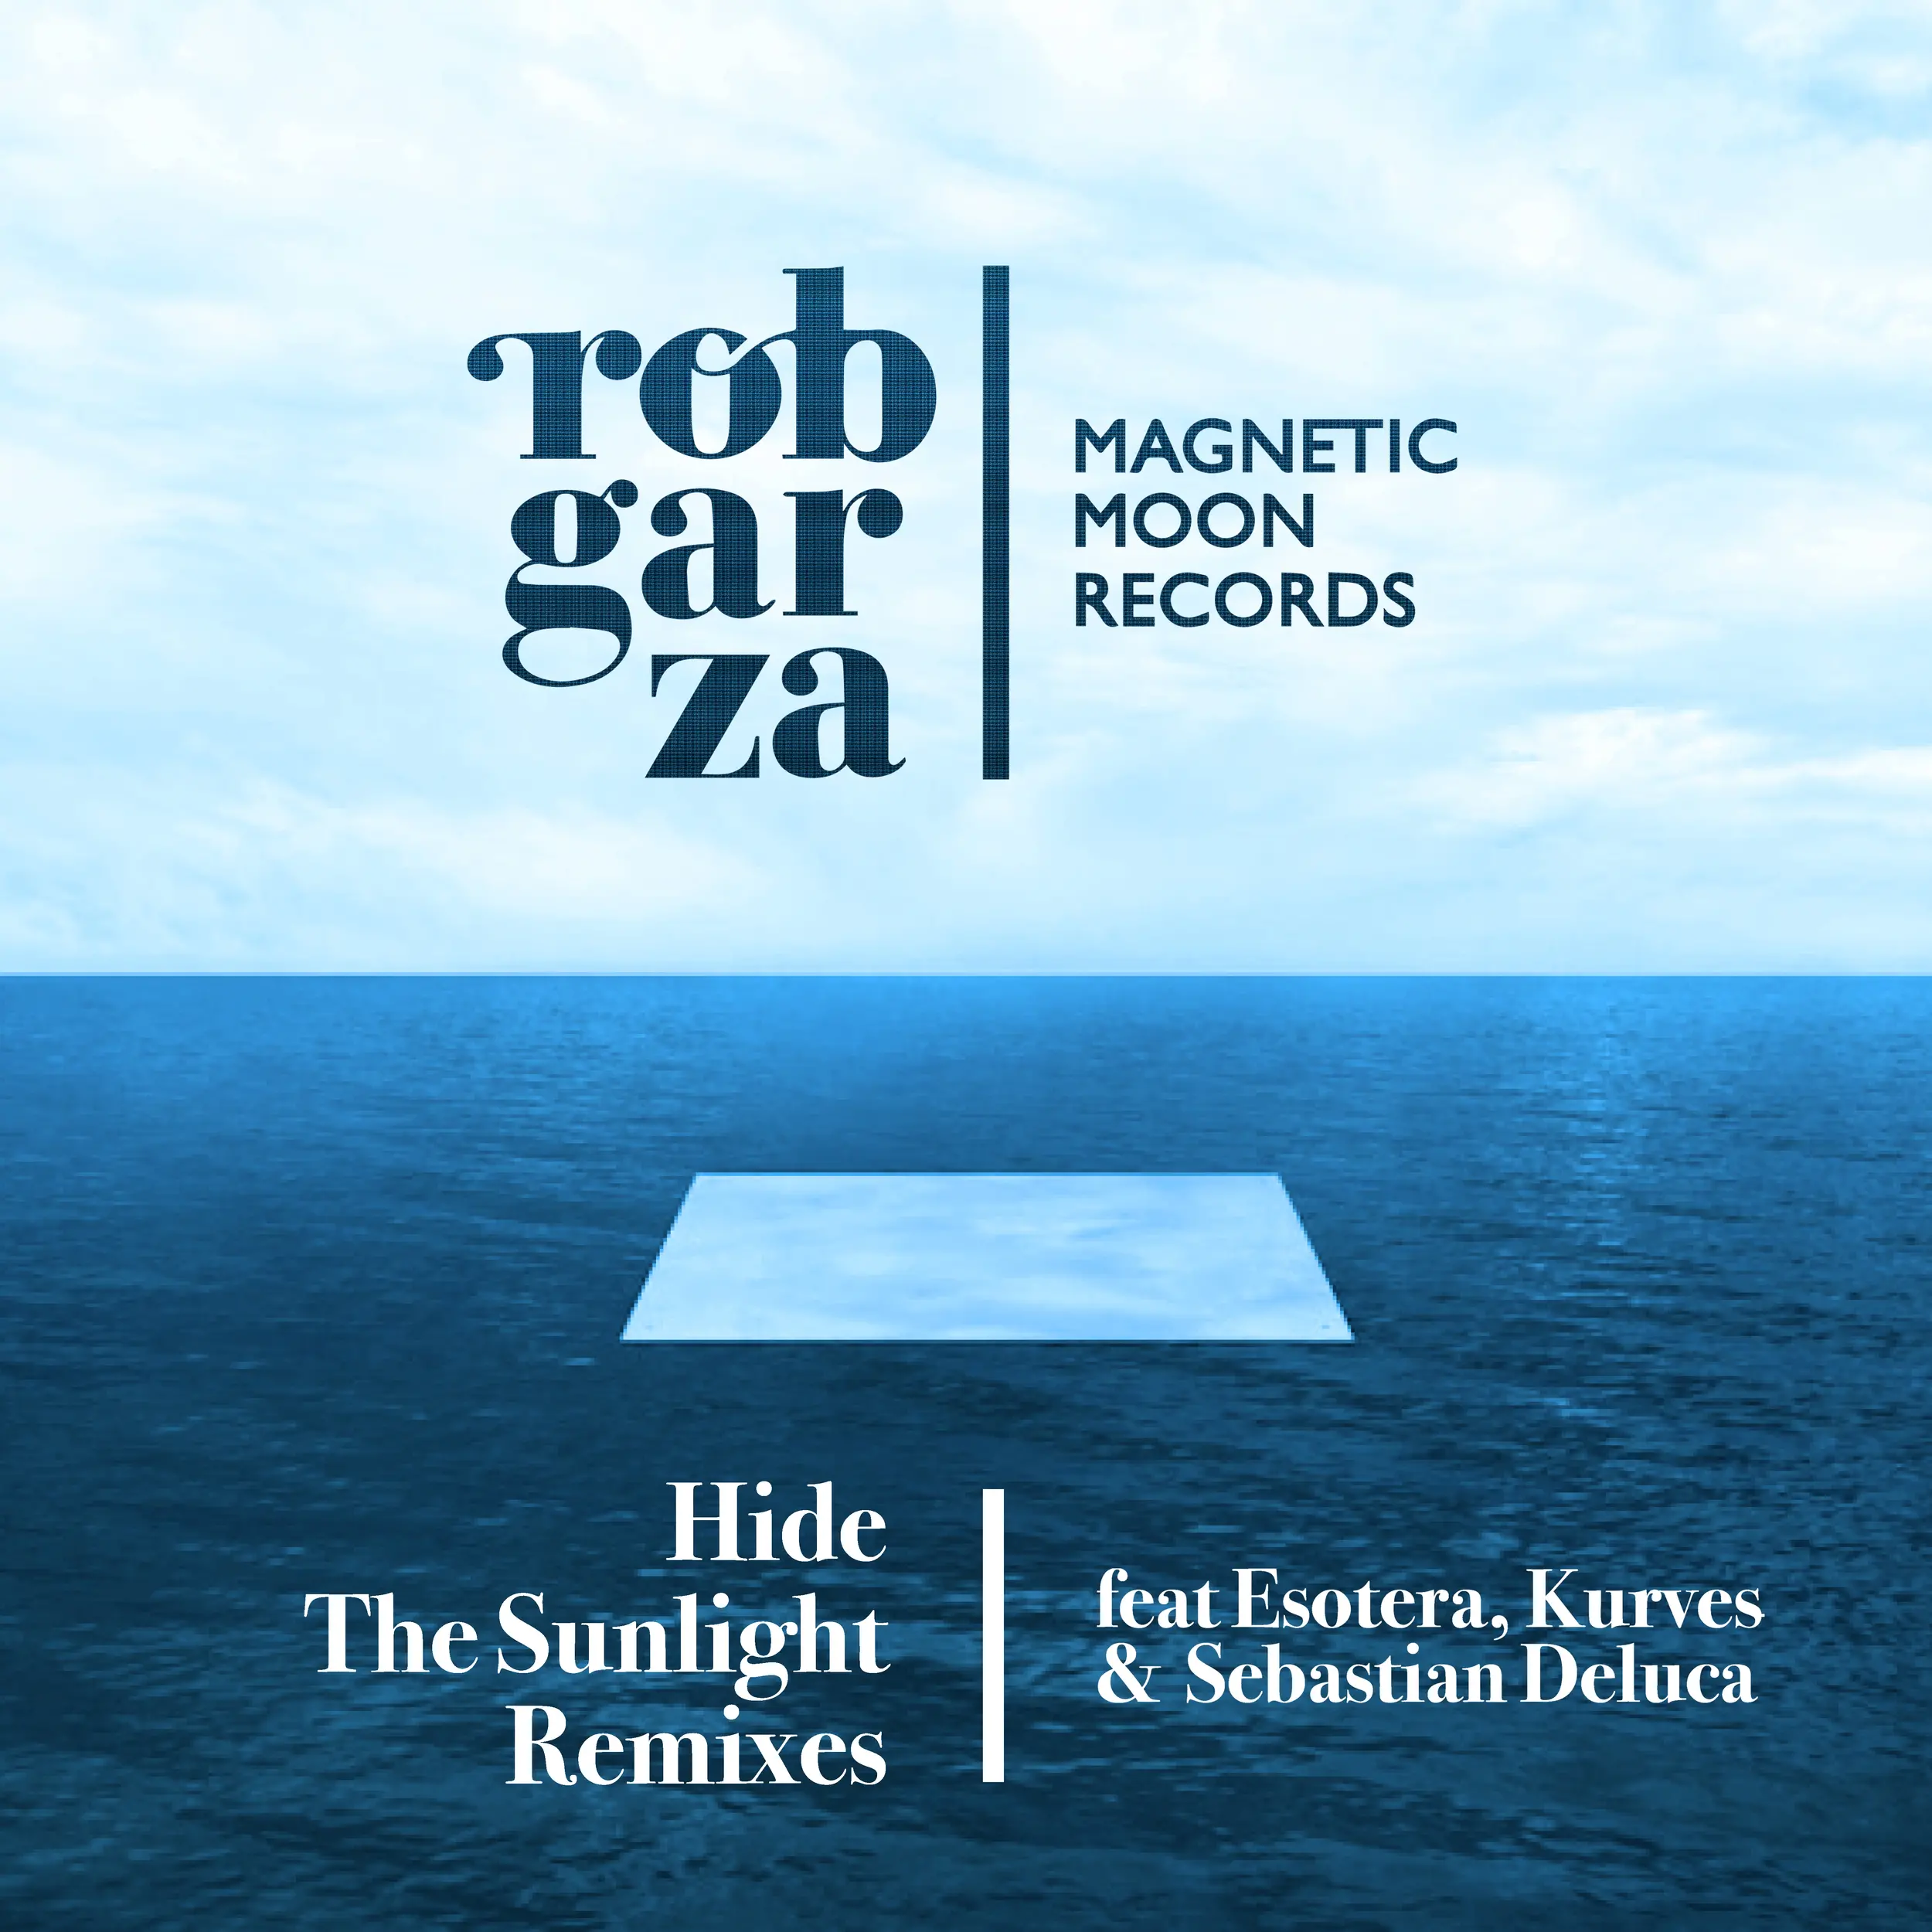 Rob Garza is a music producer known for his expertise in beatmaking and mixing mastering. He has recently released a collection of remixes for the popular track "Hide the Sunshine".